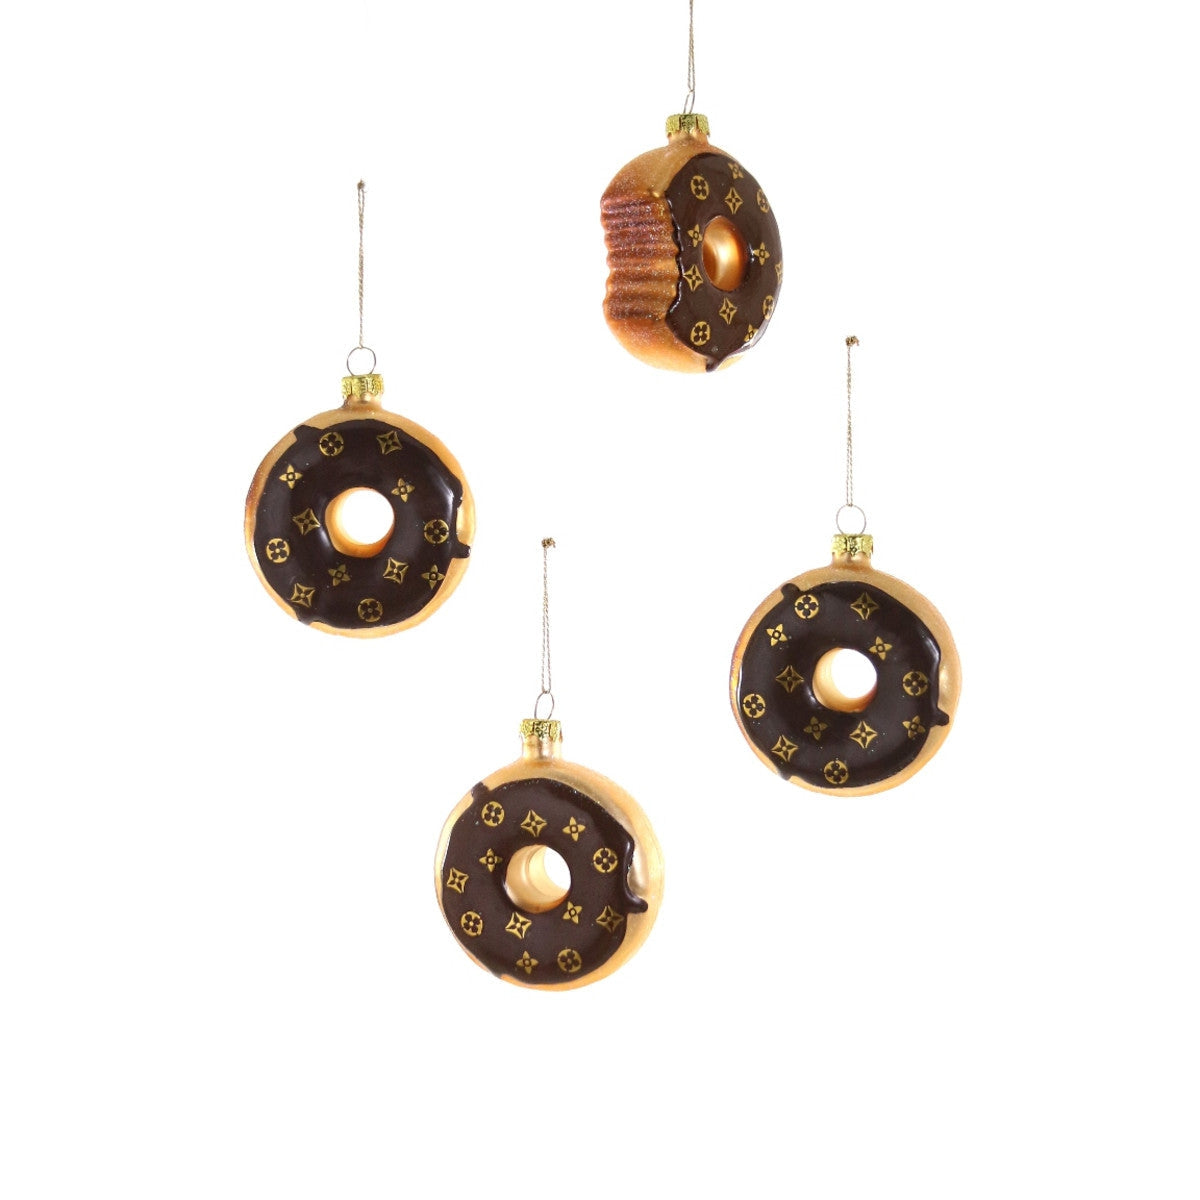 Fashion House Donut Ornament Set - Small Brown